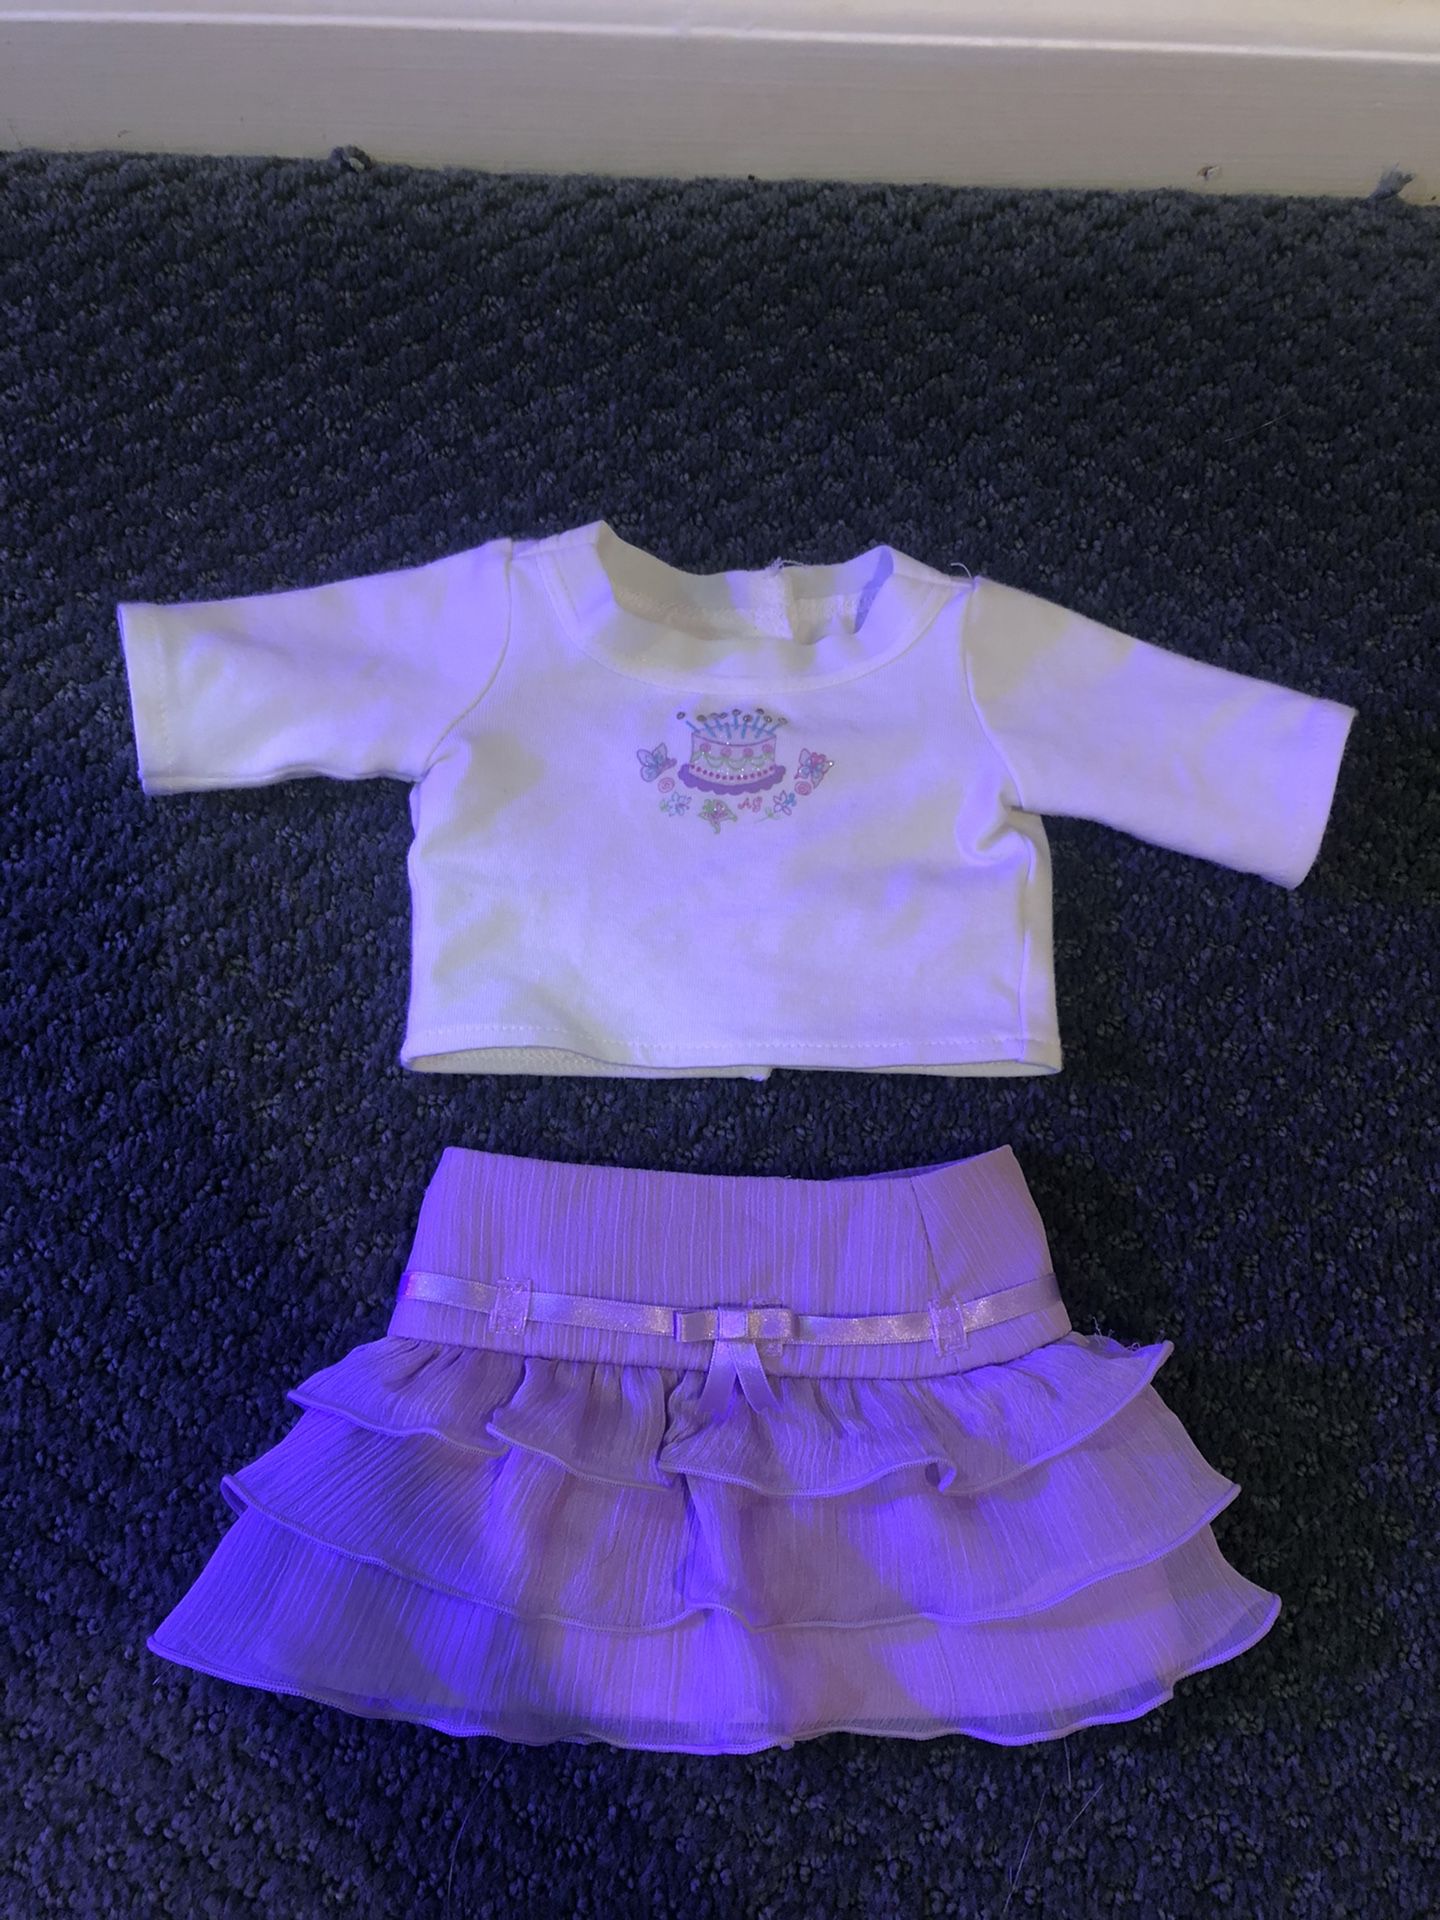 American Girl Doll Birthday Outfit